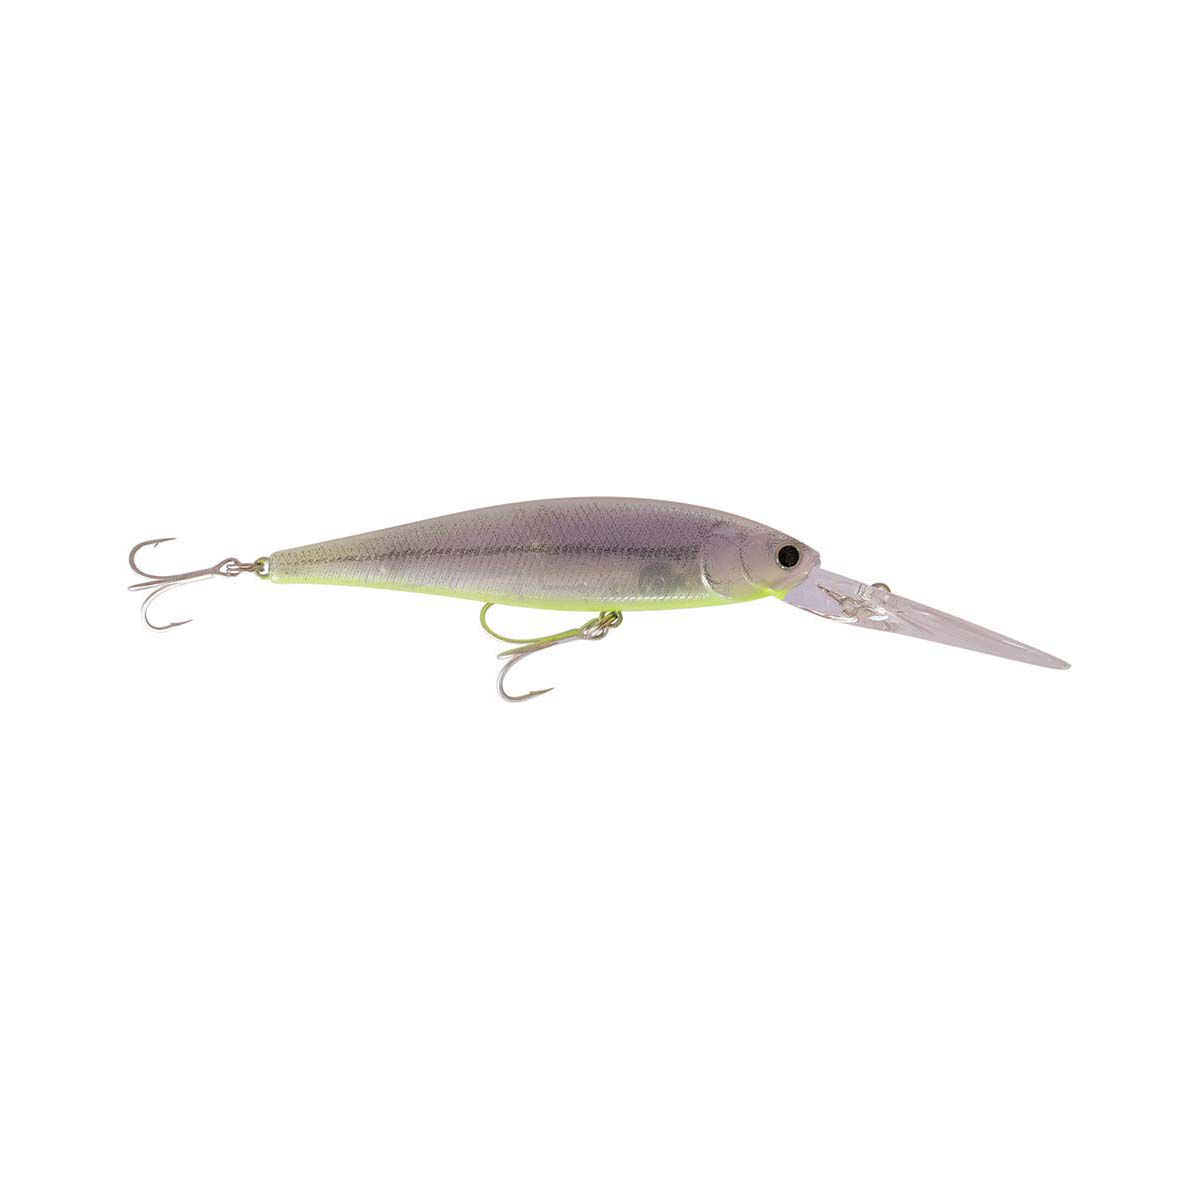 Lucky Craft Pointer Hard Body Lure 100XD AU 823